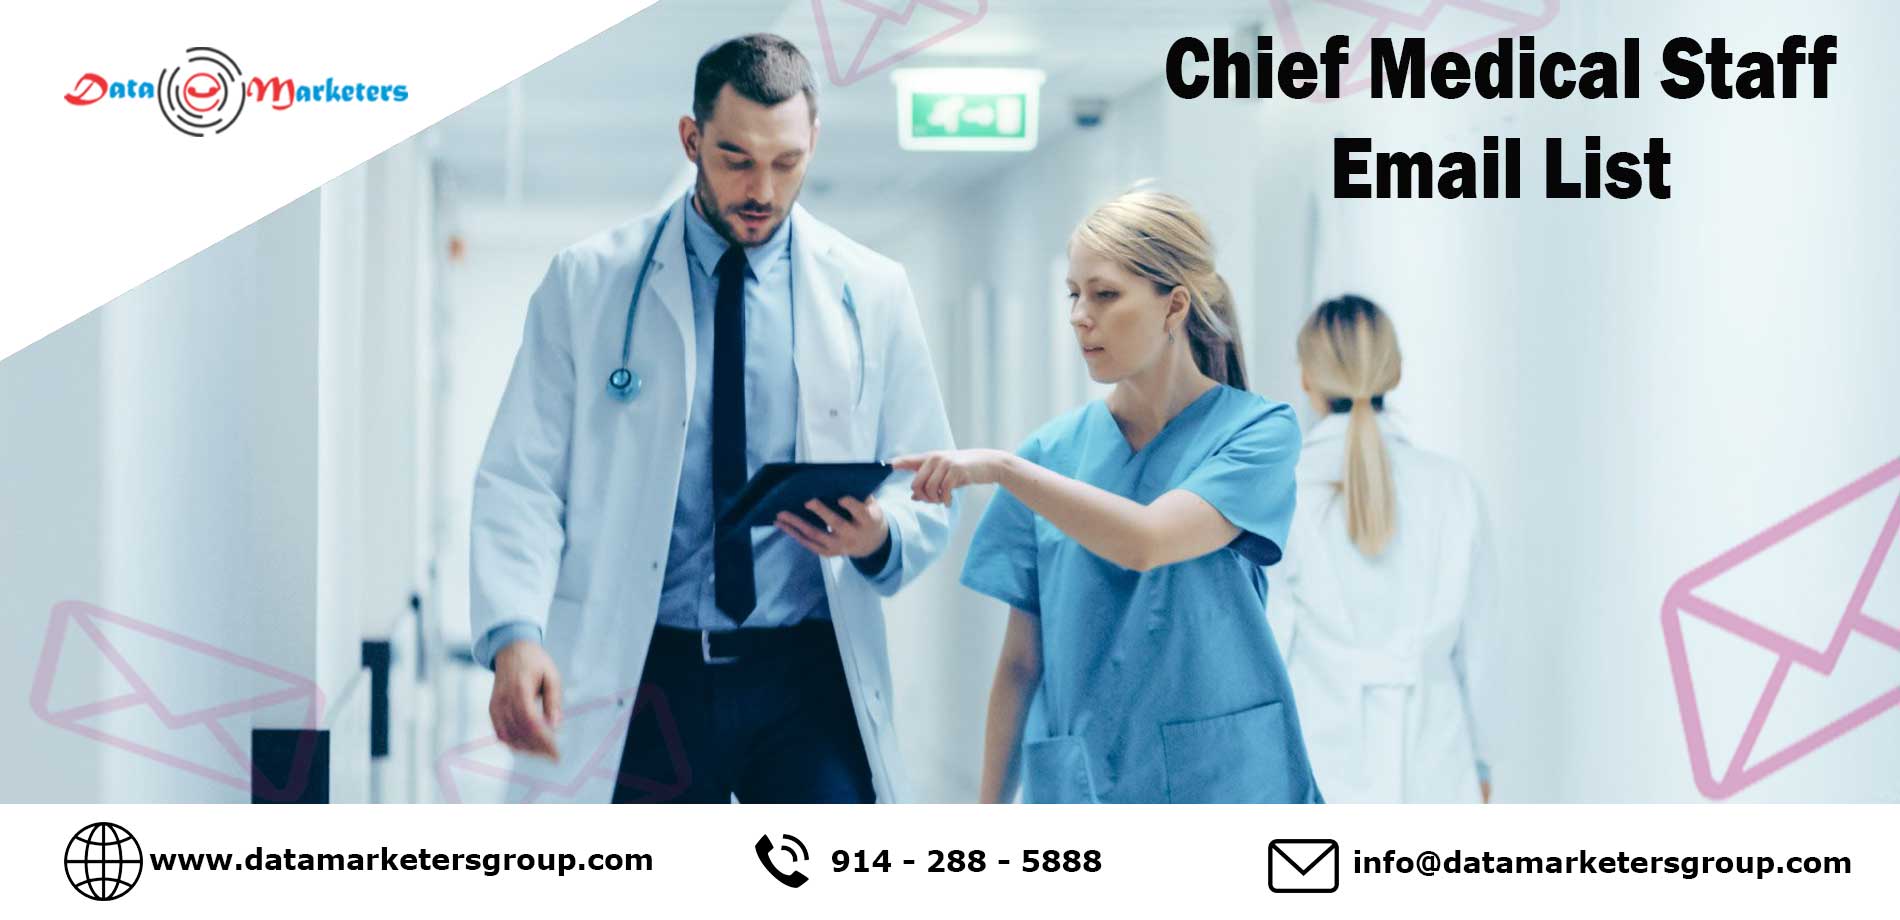 Chief Medical Staff Email List | Data Marketers Group